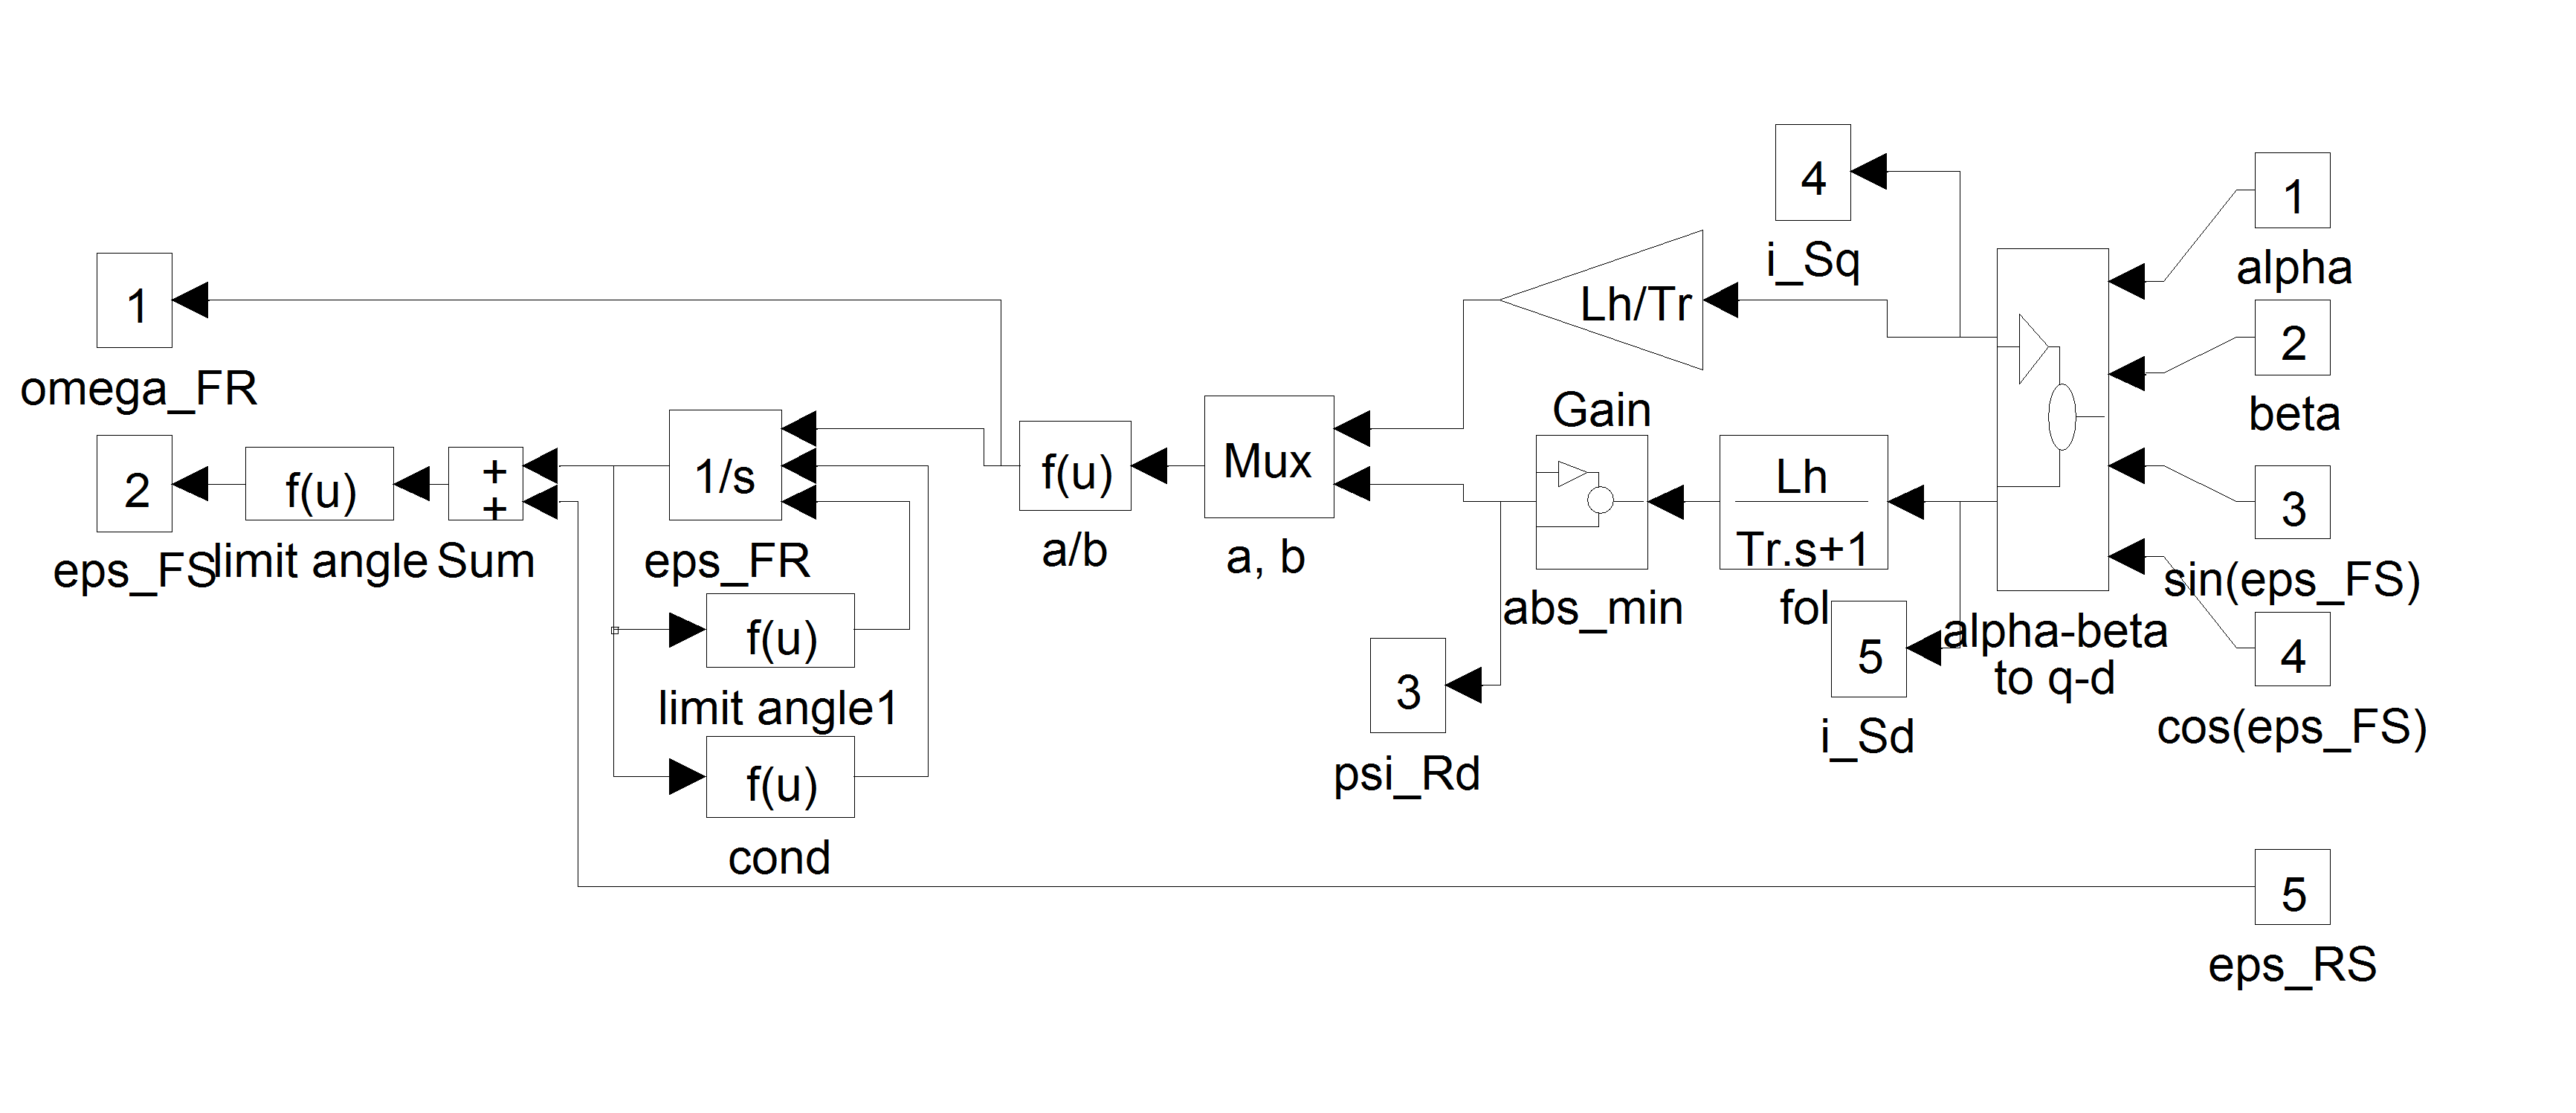 SIMULINK model of the rotor flux identification